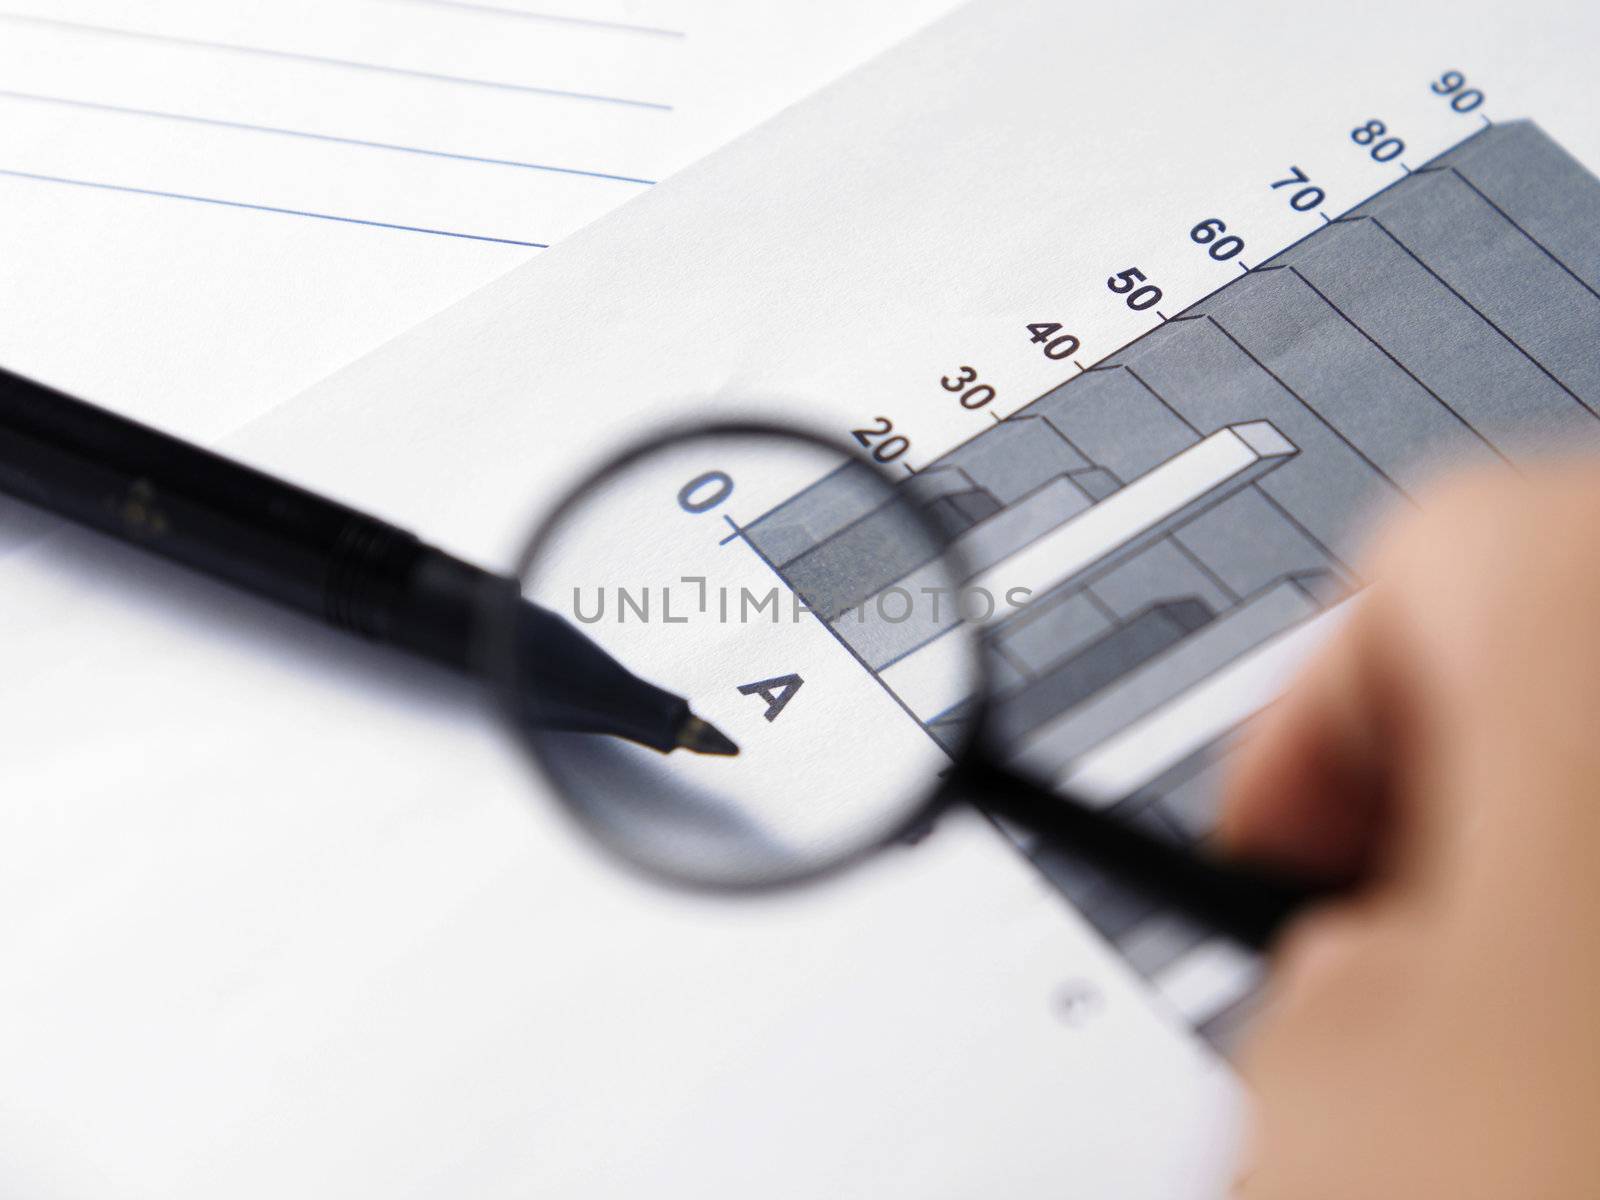 Fountain pen and magnifier glasses on stock chart.